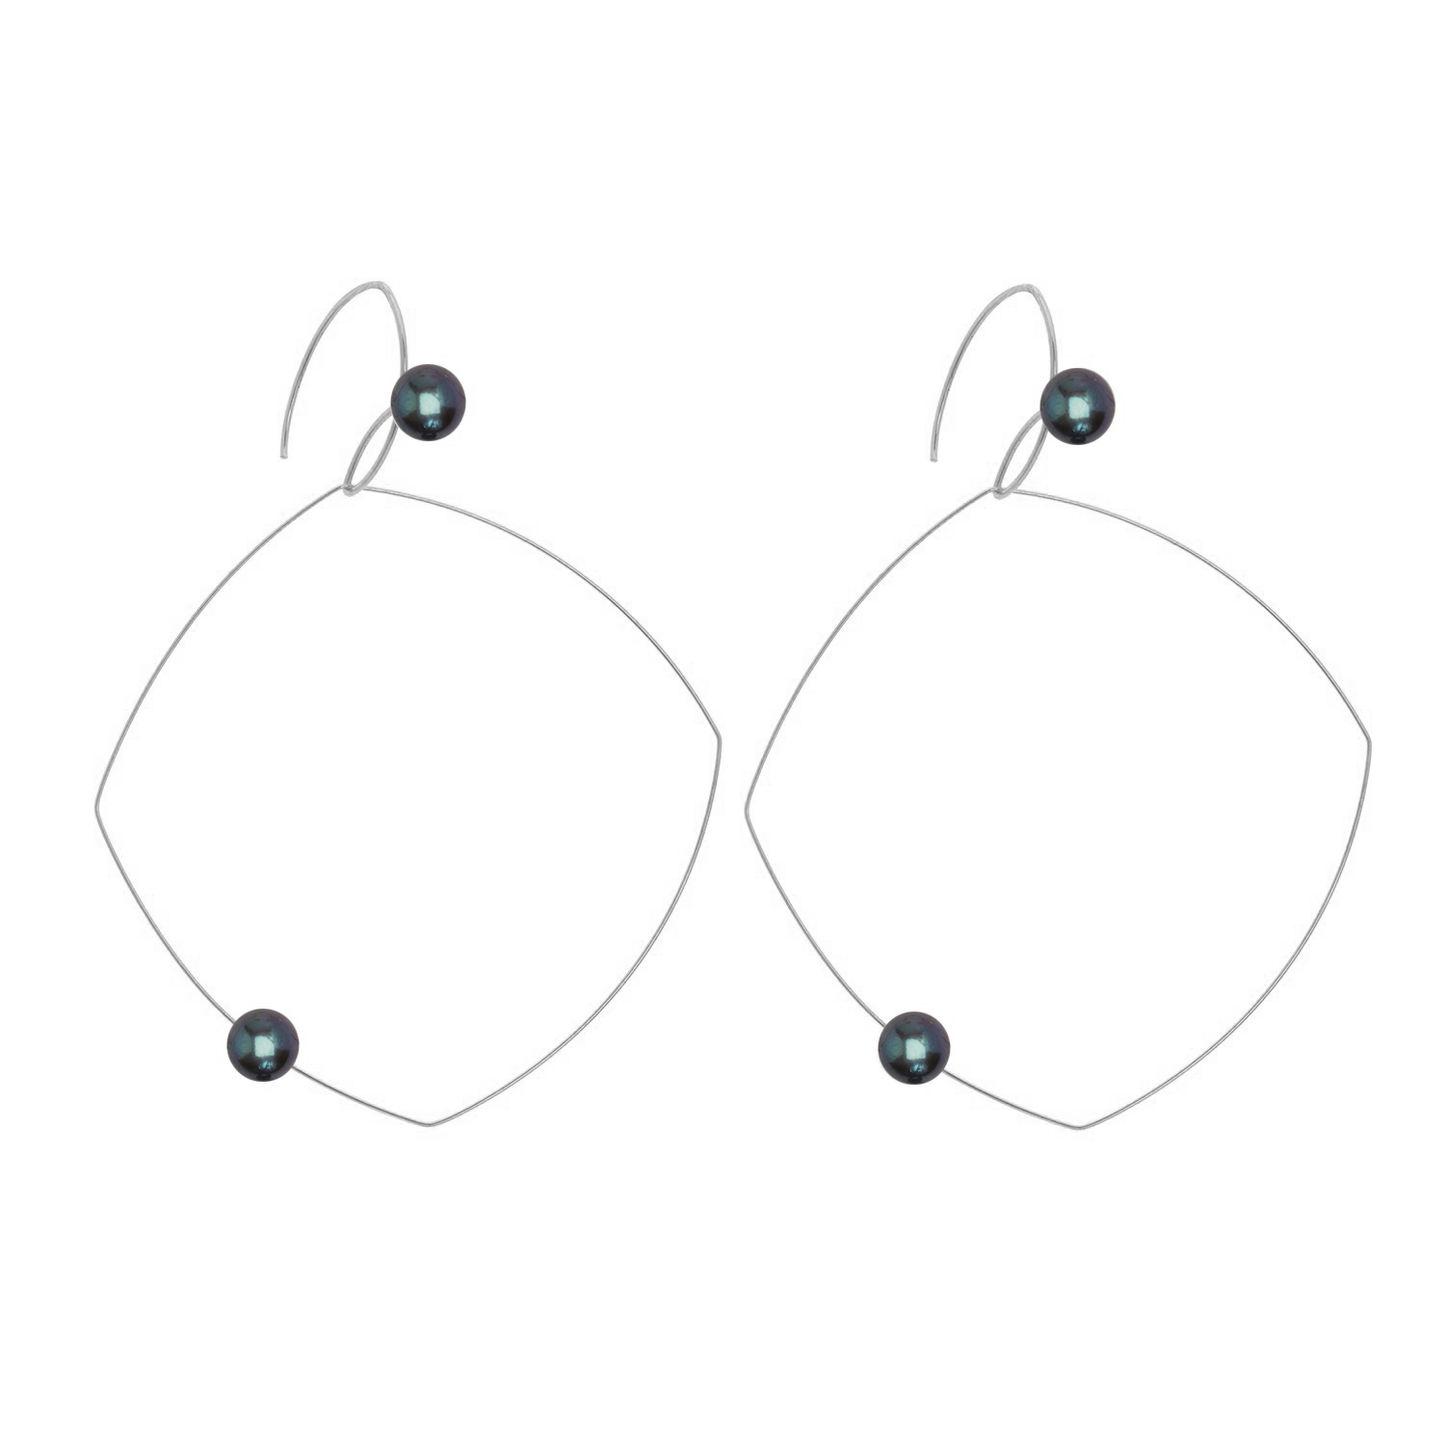 Multi Wear Square Earrings with Round Freshwater Pearls